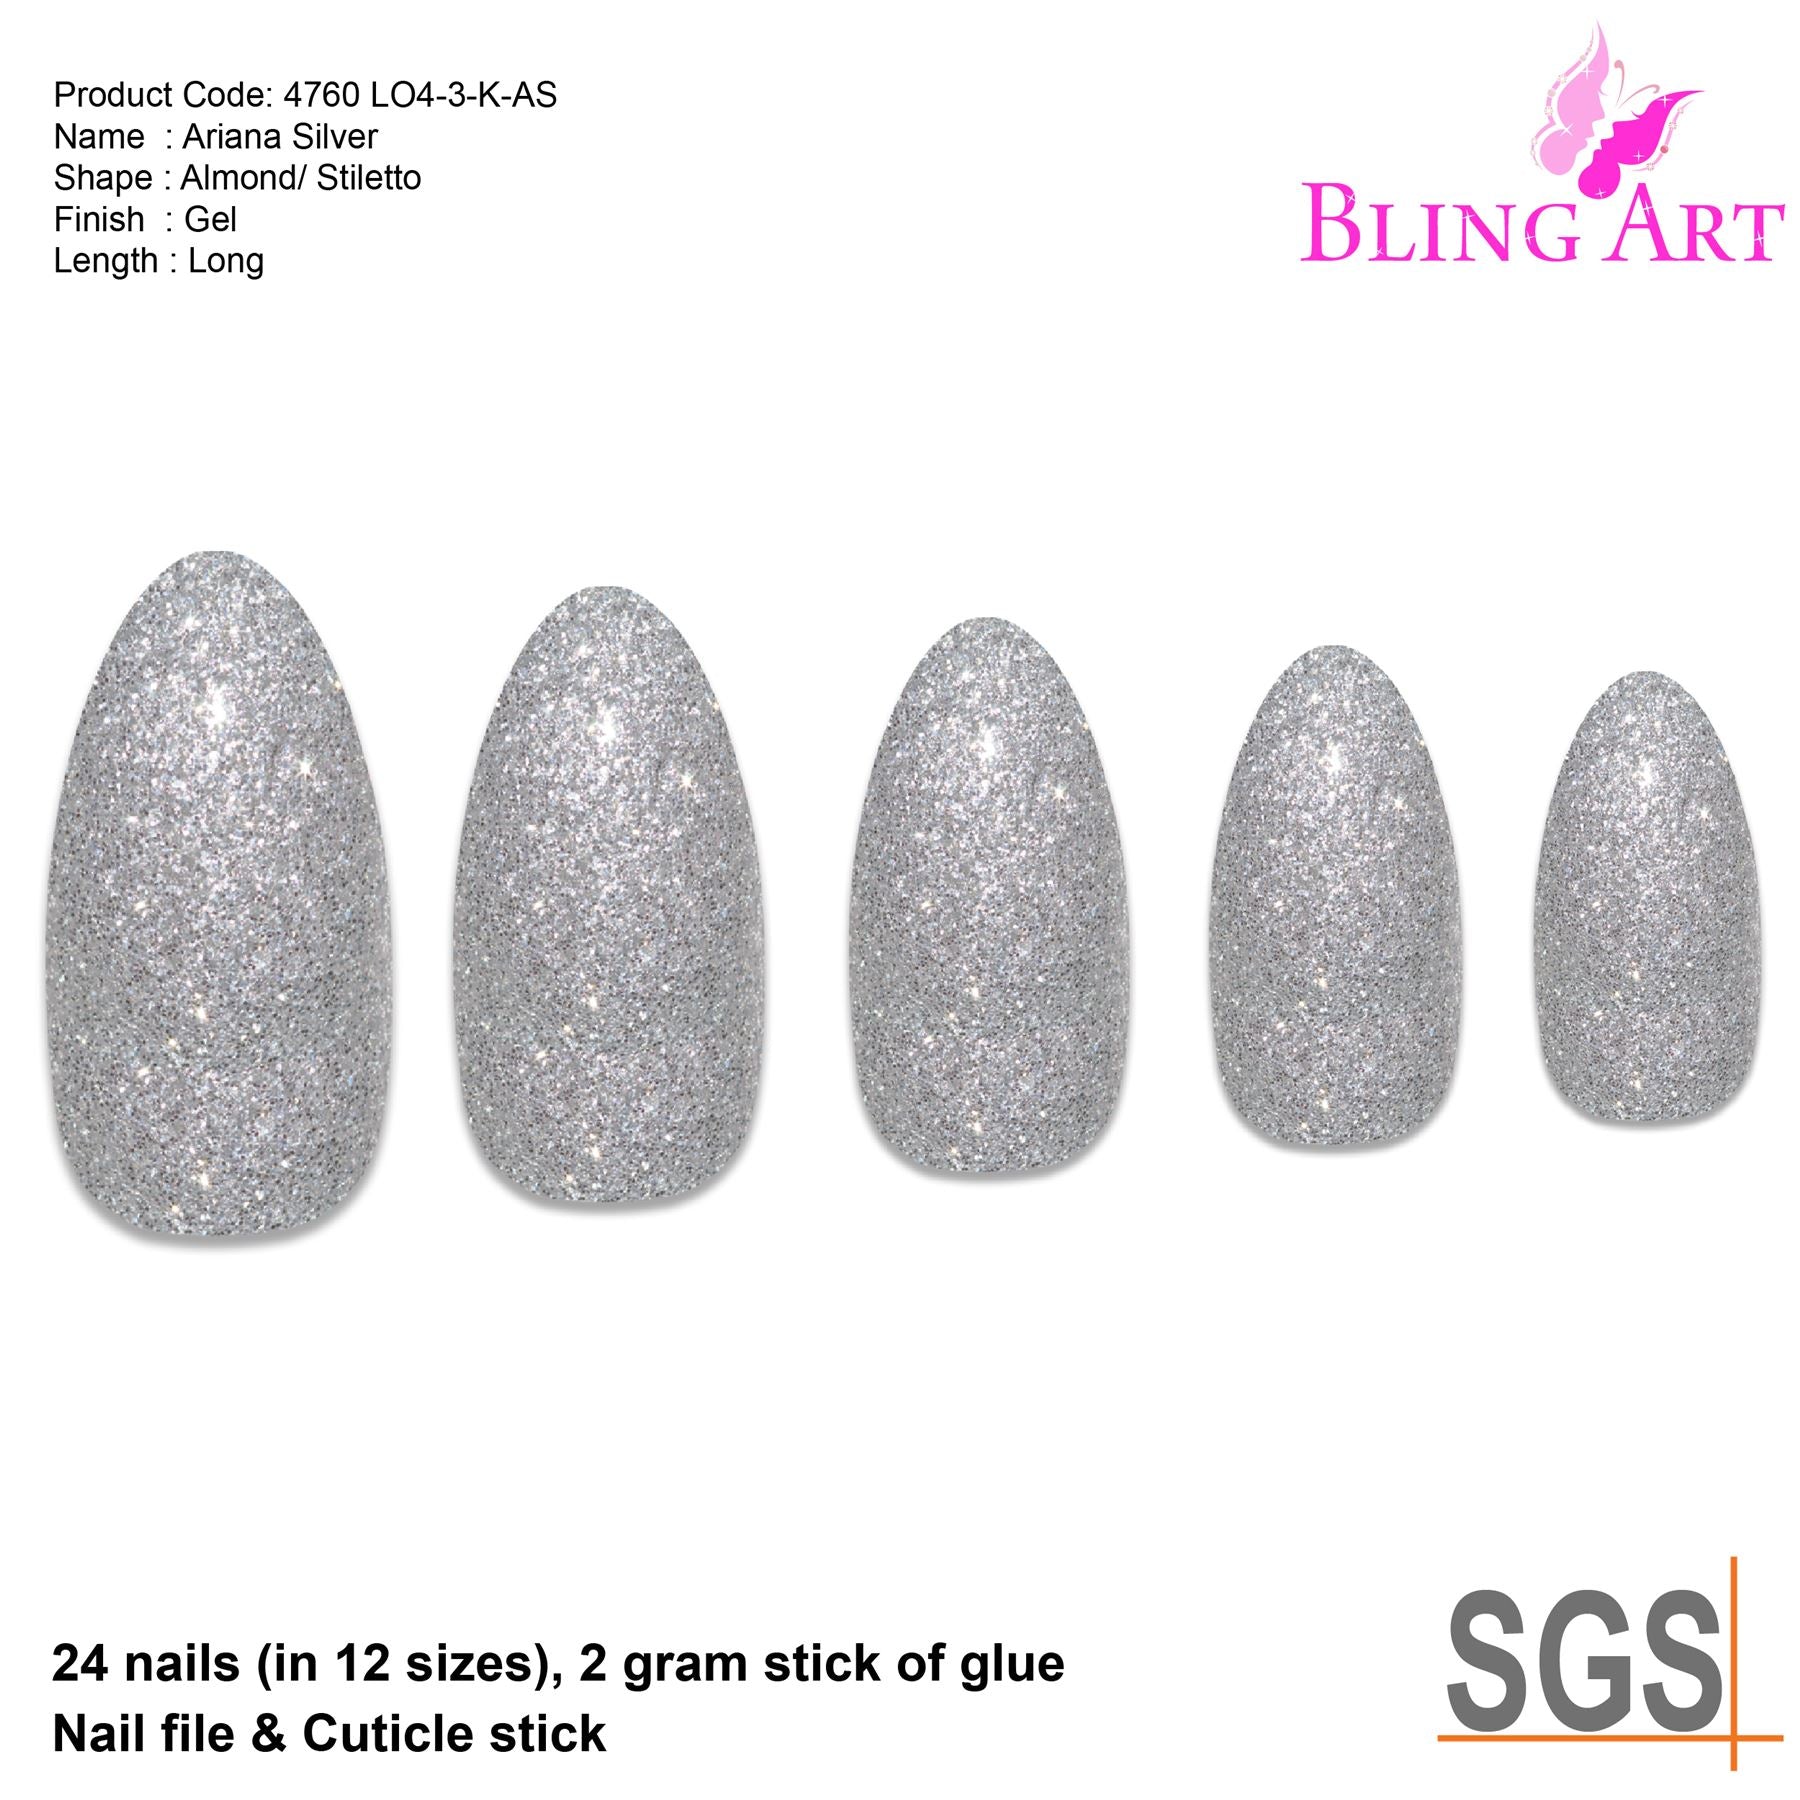 False Nails Bling Art Silver Gel Almond Stiletto Long Fake Acrylic Tips with Glue